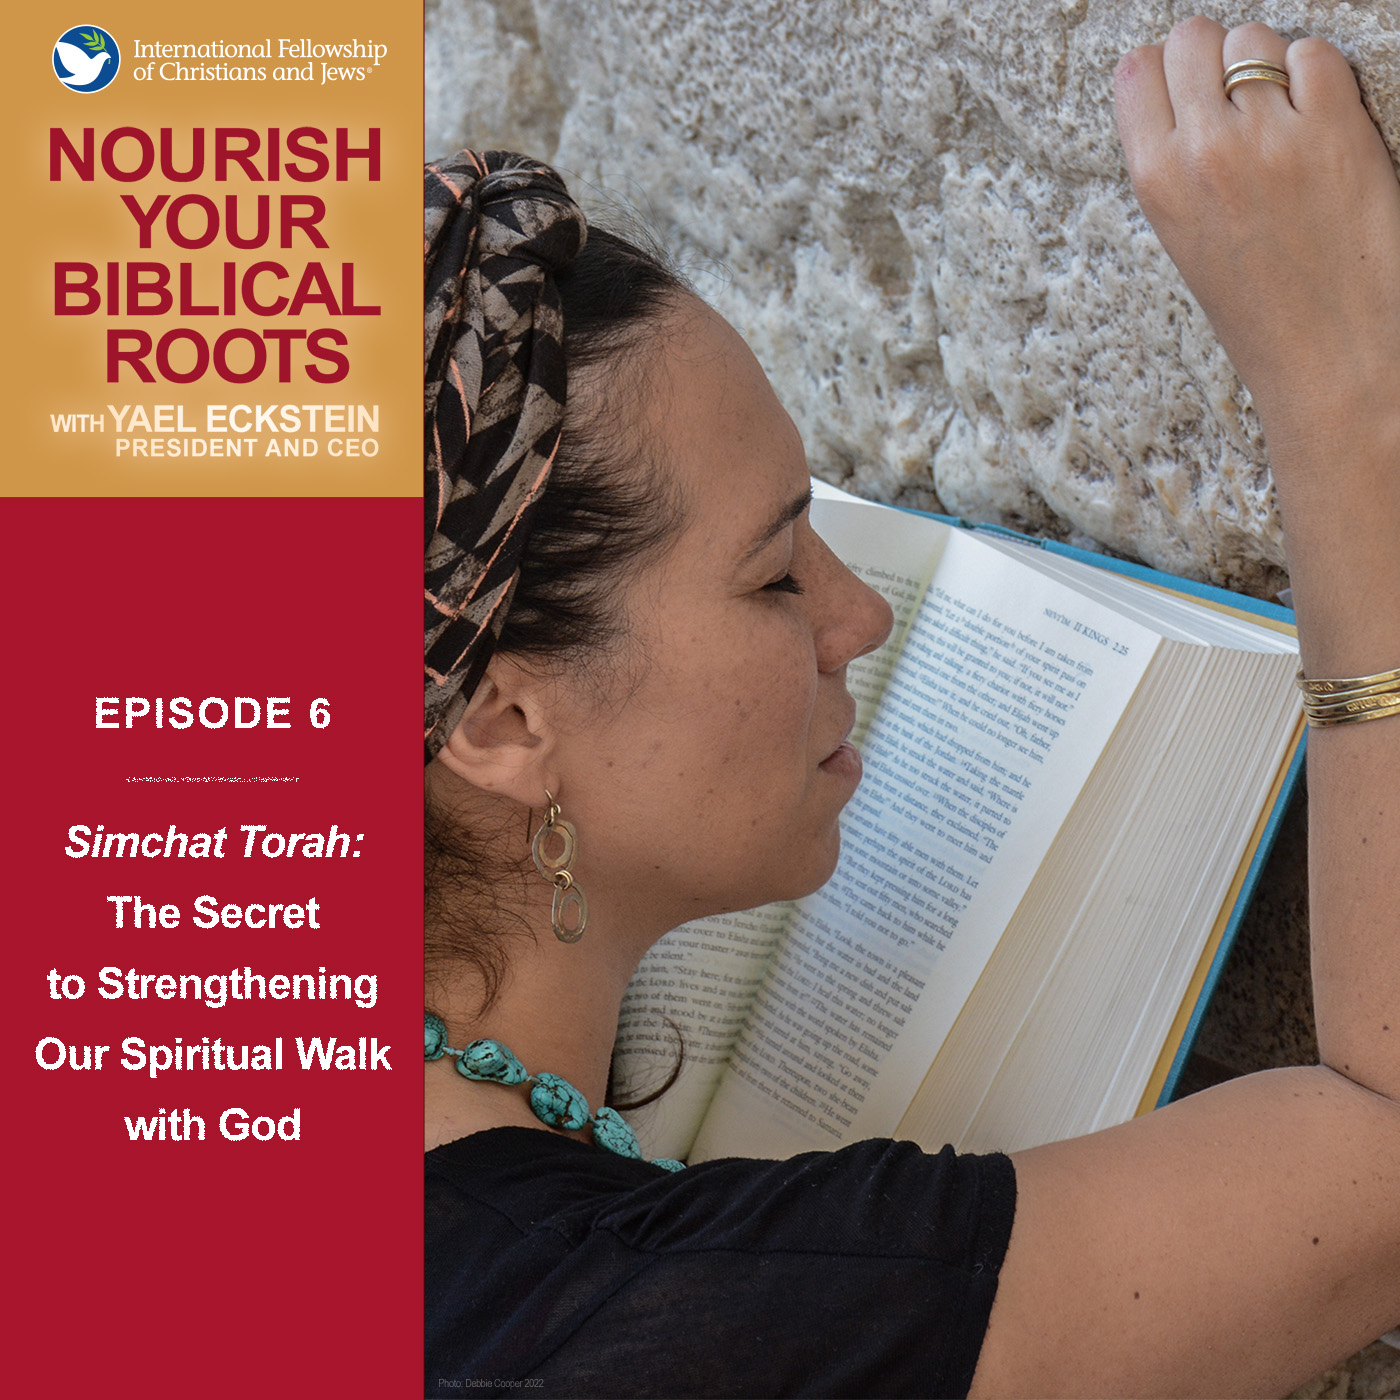 Simchat Torah: The Secret to Strengthening Our Spiritual Walk with God